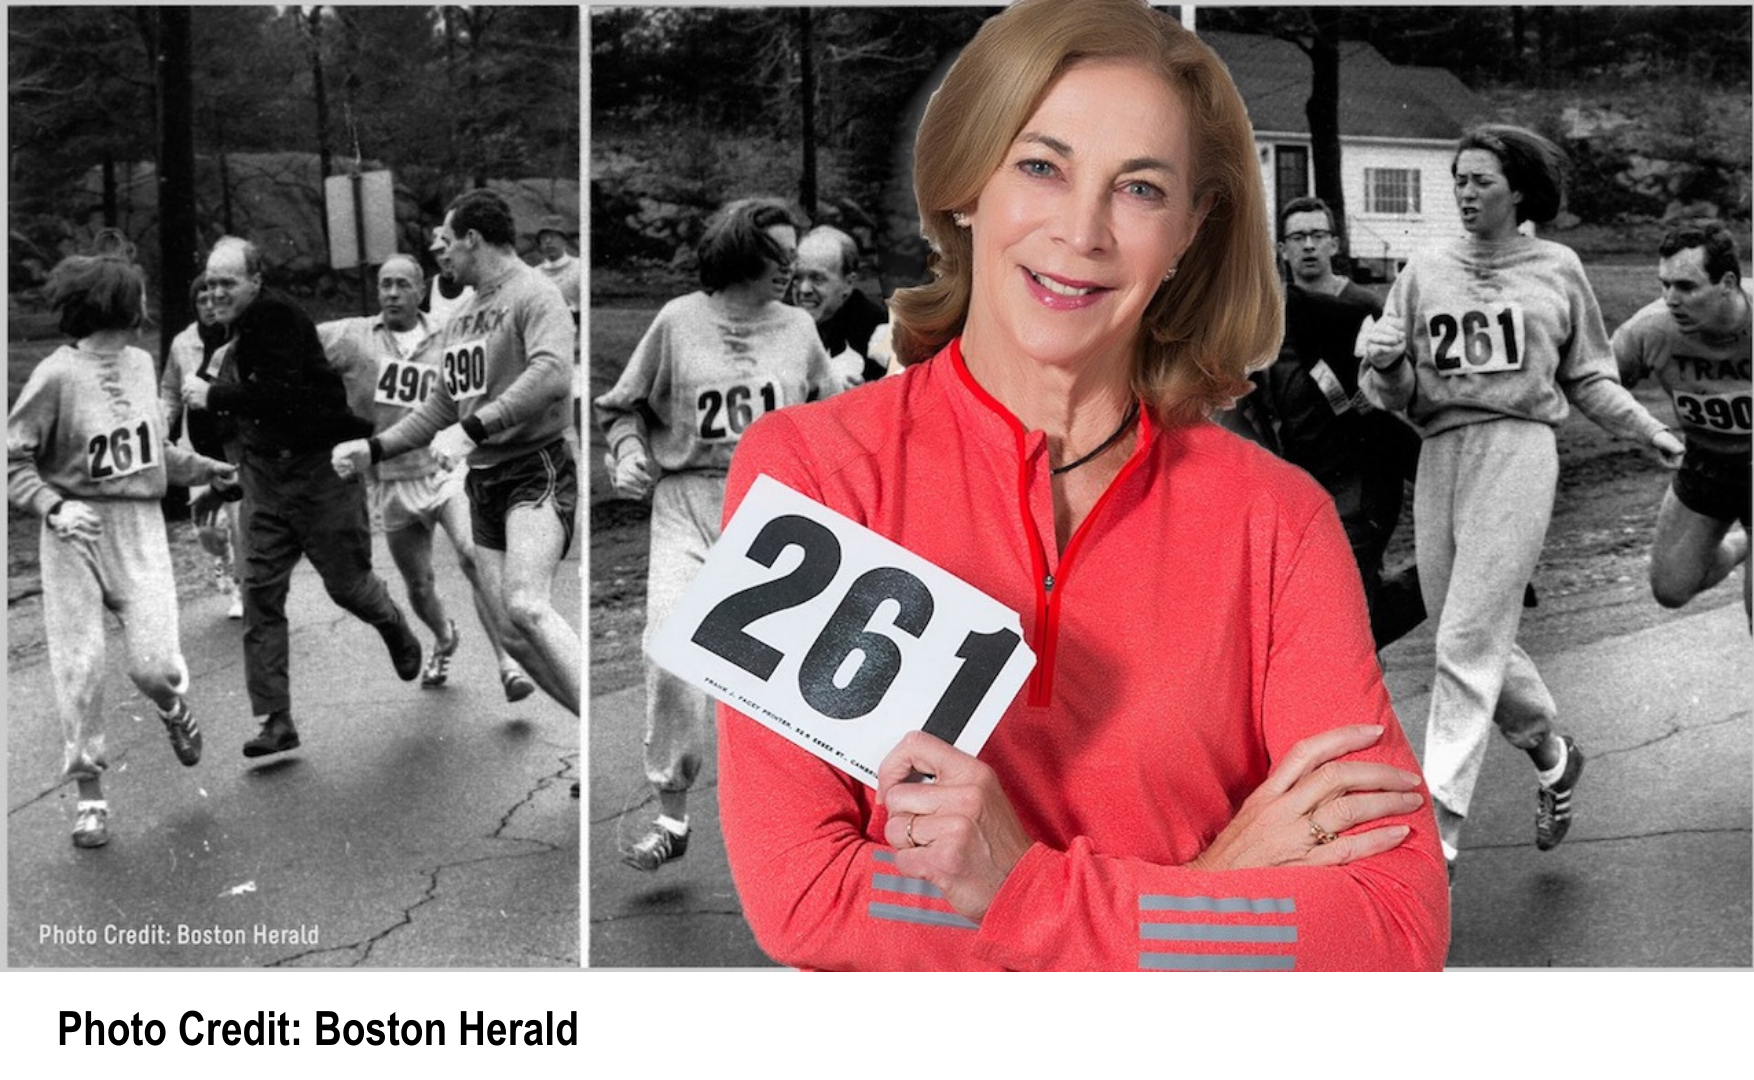 Kathrine Switzer, an icon of the women's running movement, proudly poses with her bib number 261 in front of a historic photo from her famous Boston Marathon run